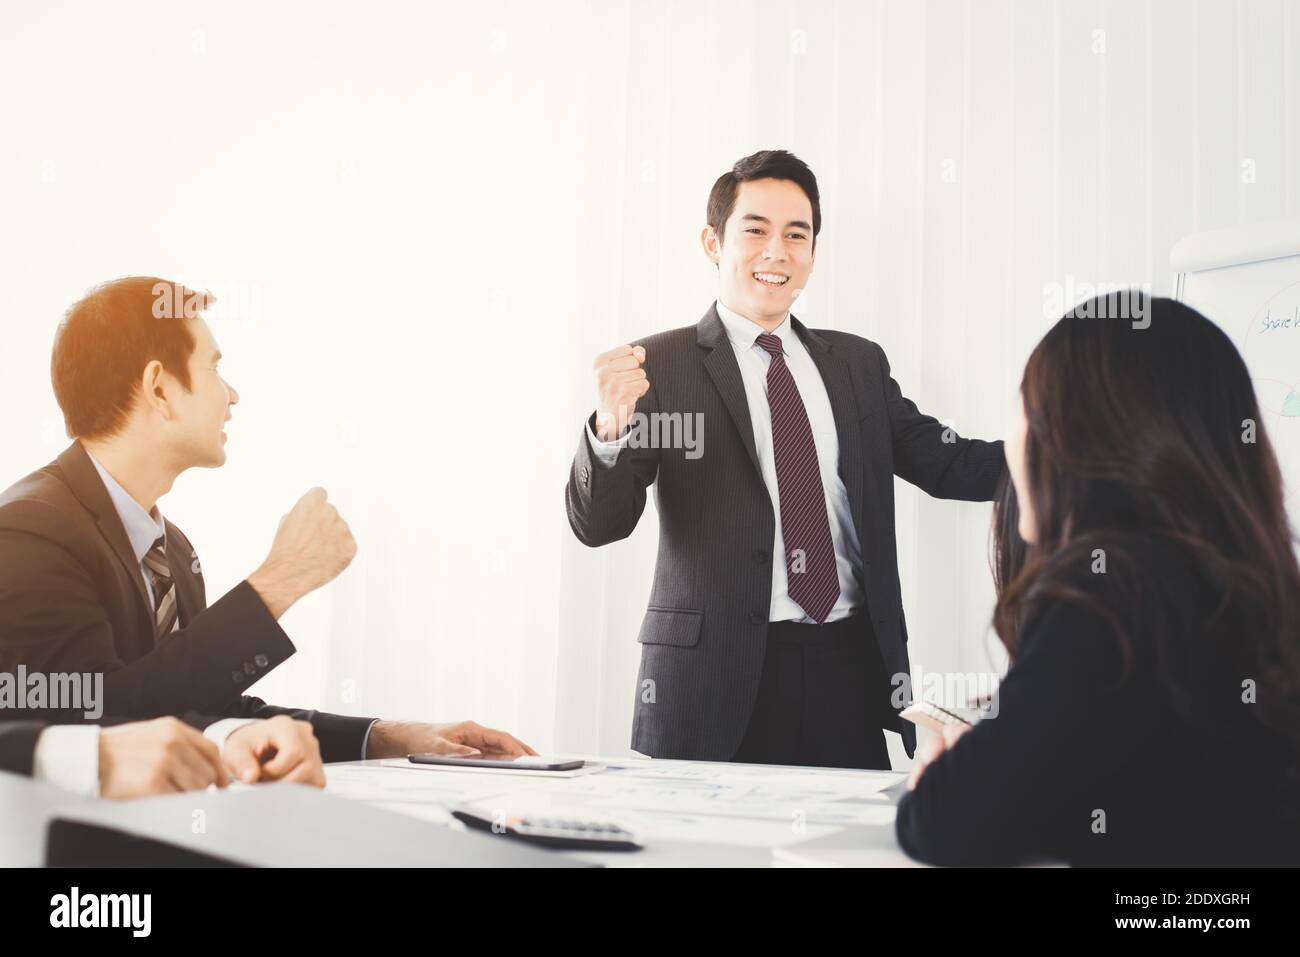 Powerful businessman clenching his fist empowering his colleagues in front of meeting room Stock Photo